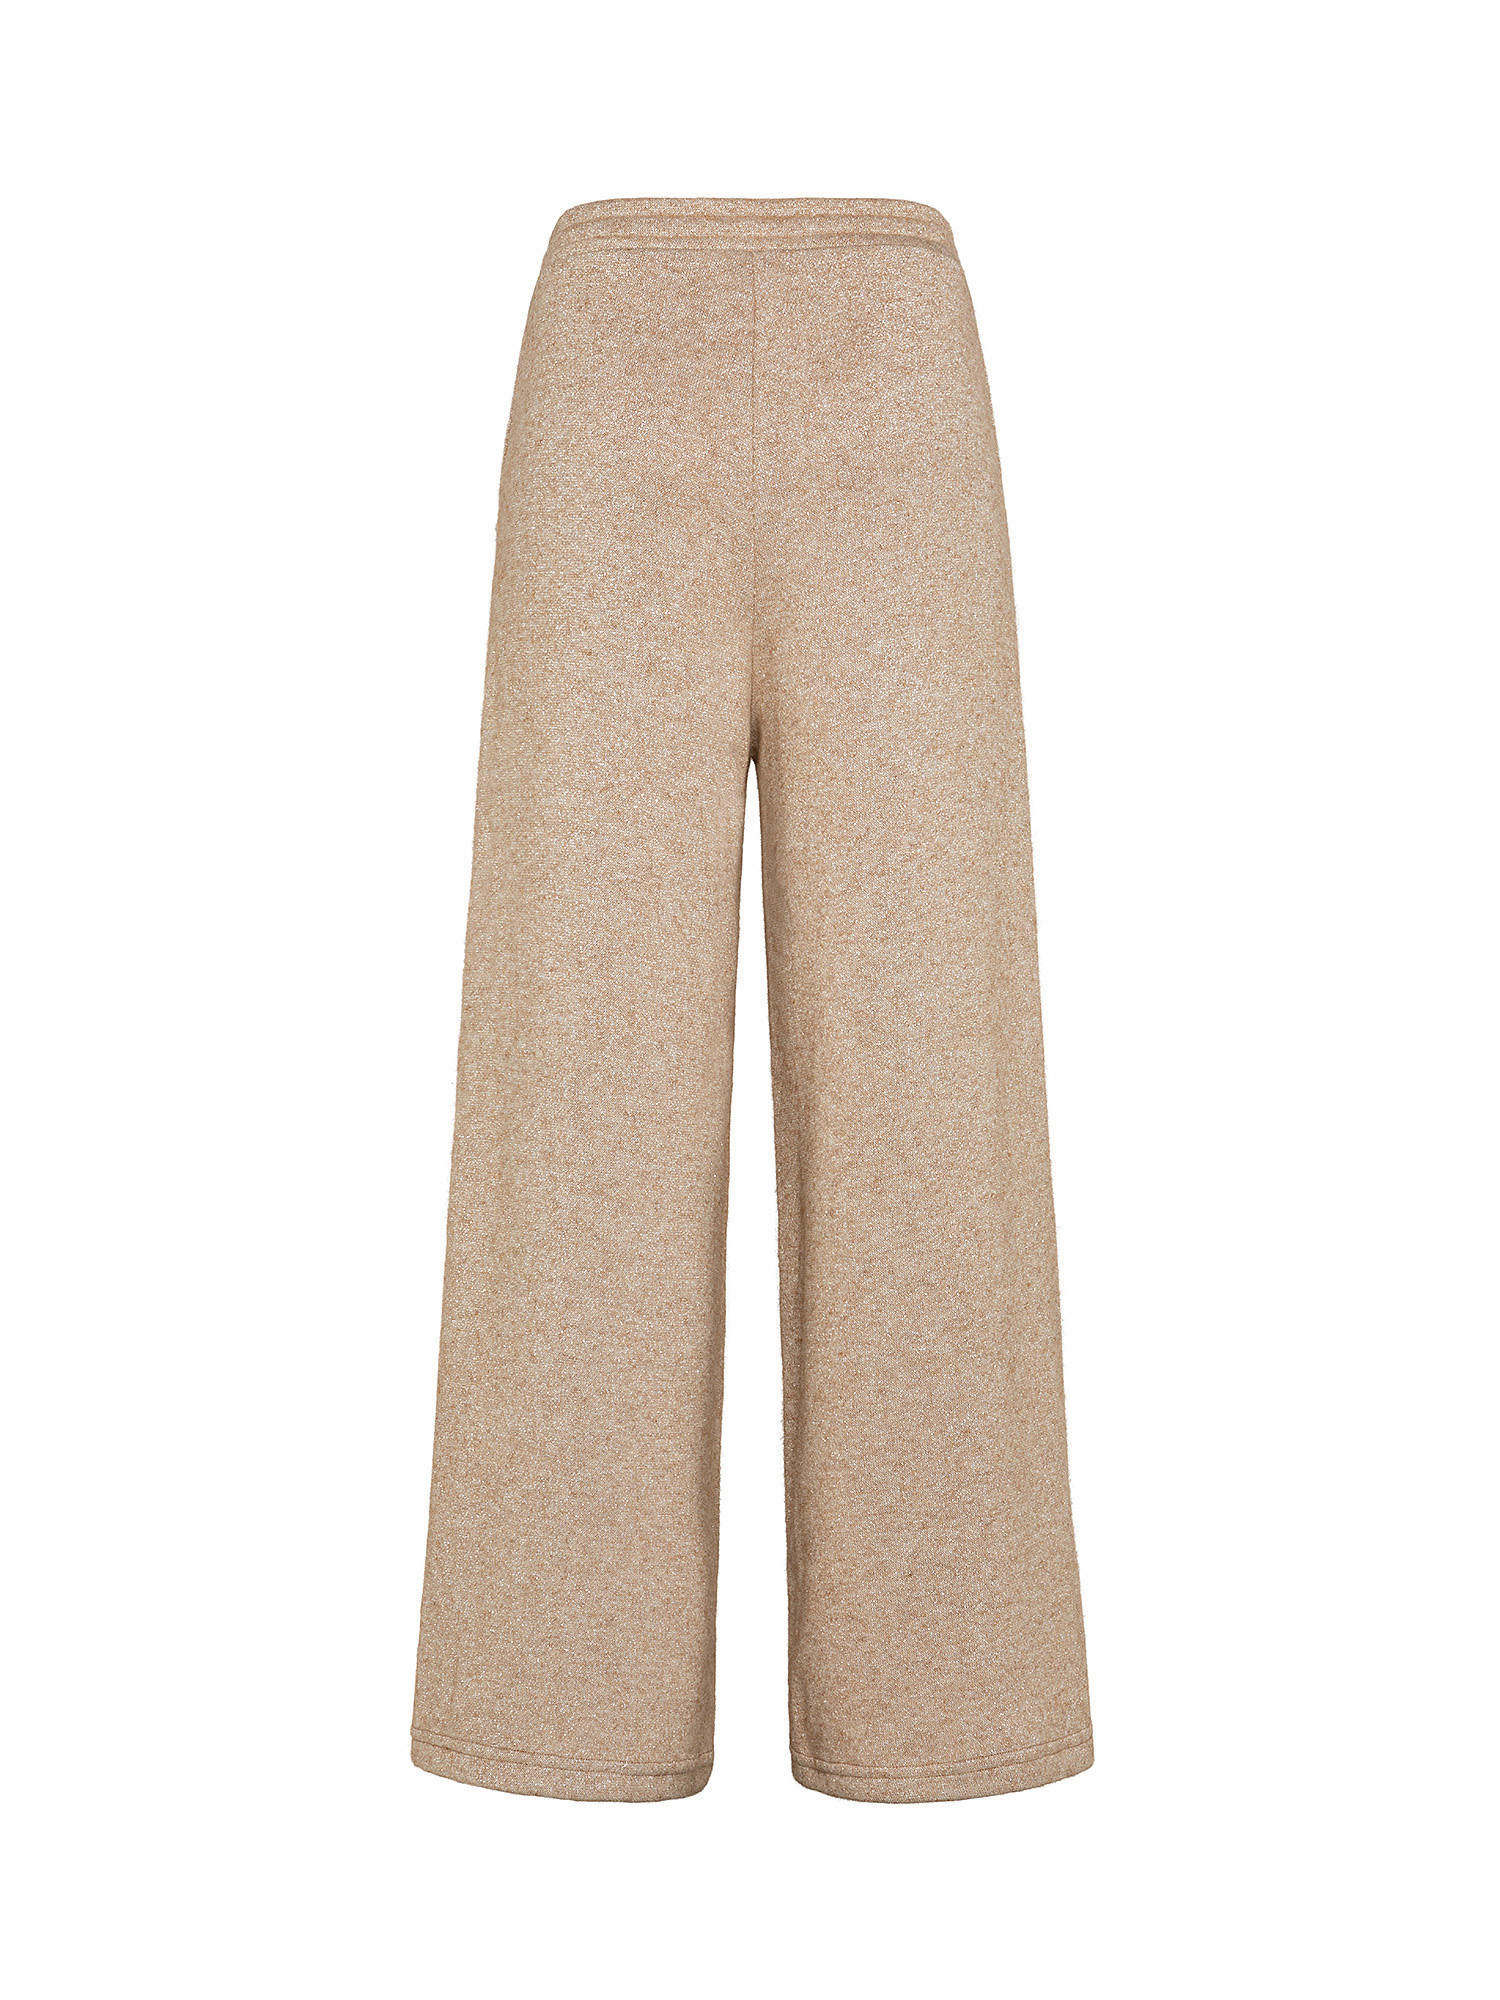 Lurex fleece trousers with drawstring at the waist, Beige, large image number 1